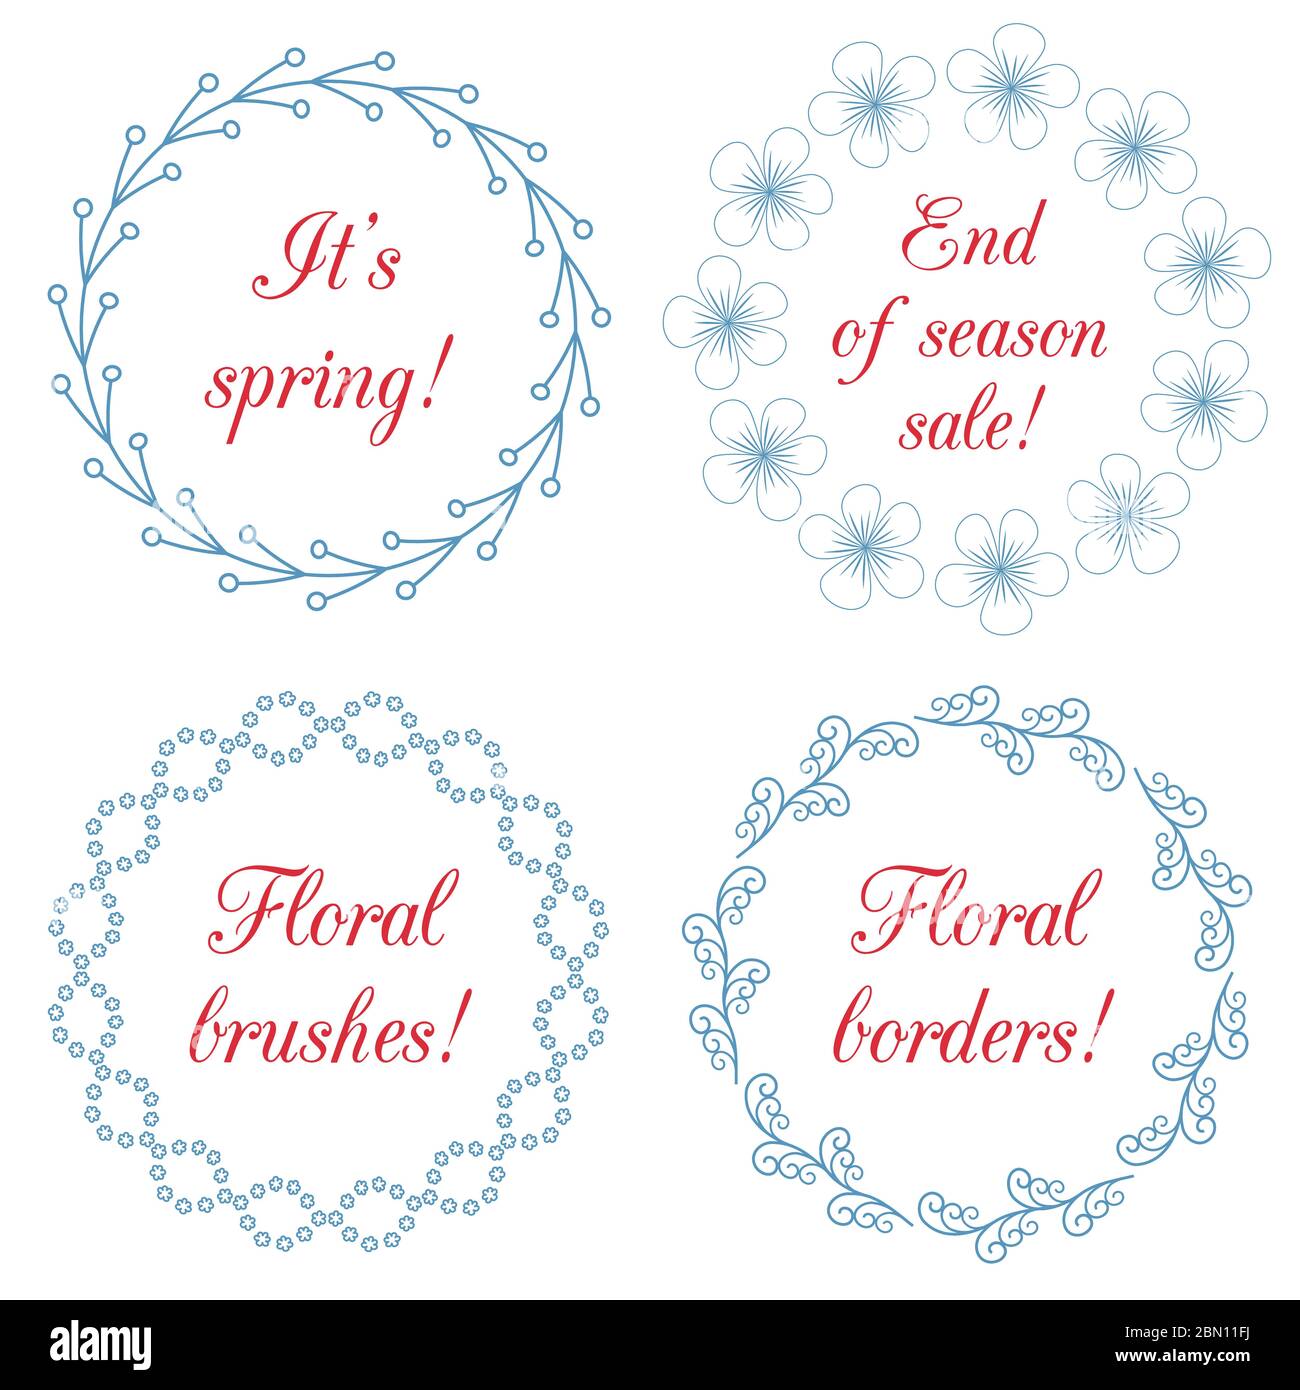 Floral frame vector brush set. Collection of cute retro floral borders, frames brushes. Isolated on white background. Perfect for wedding invitations, Stock Vector